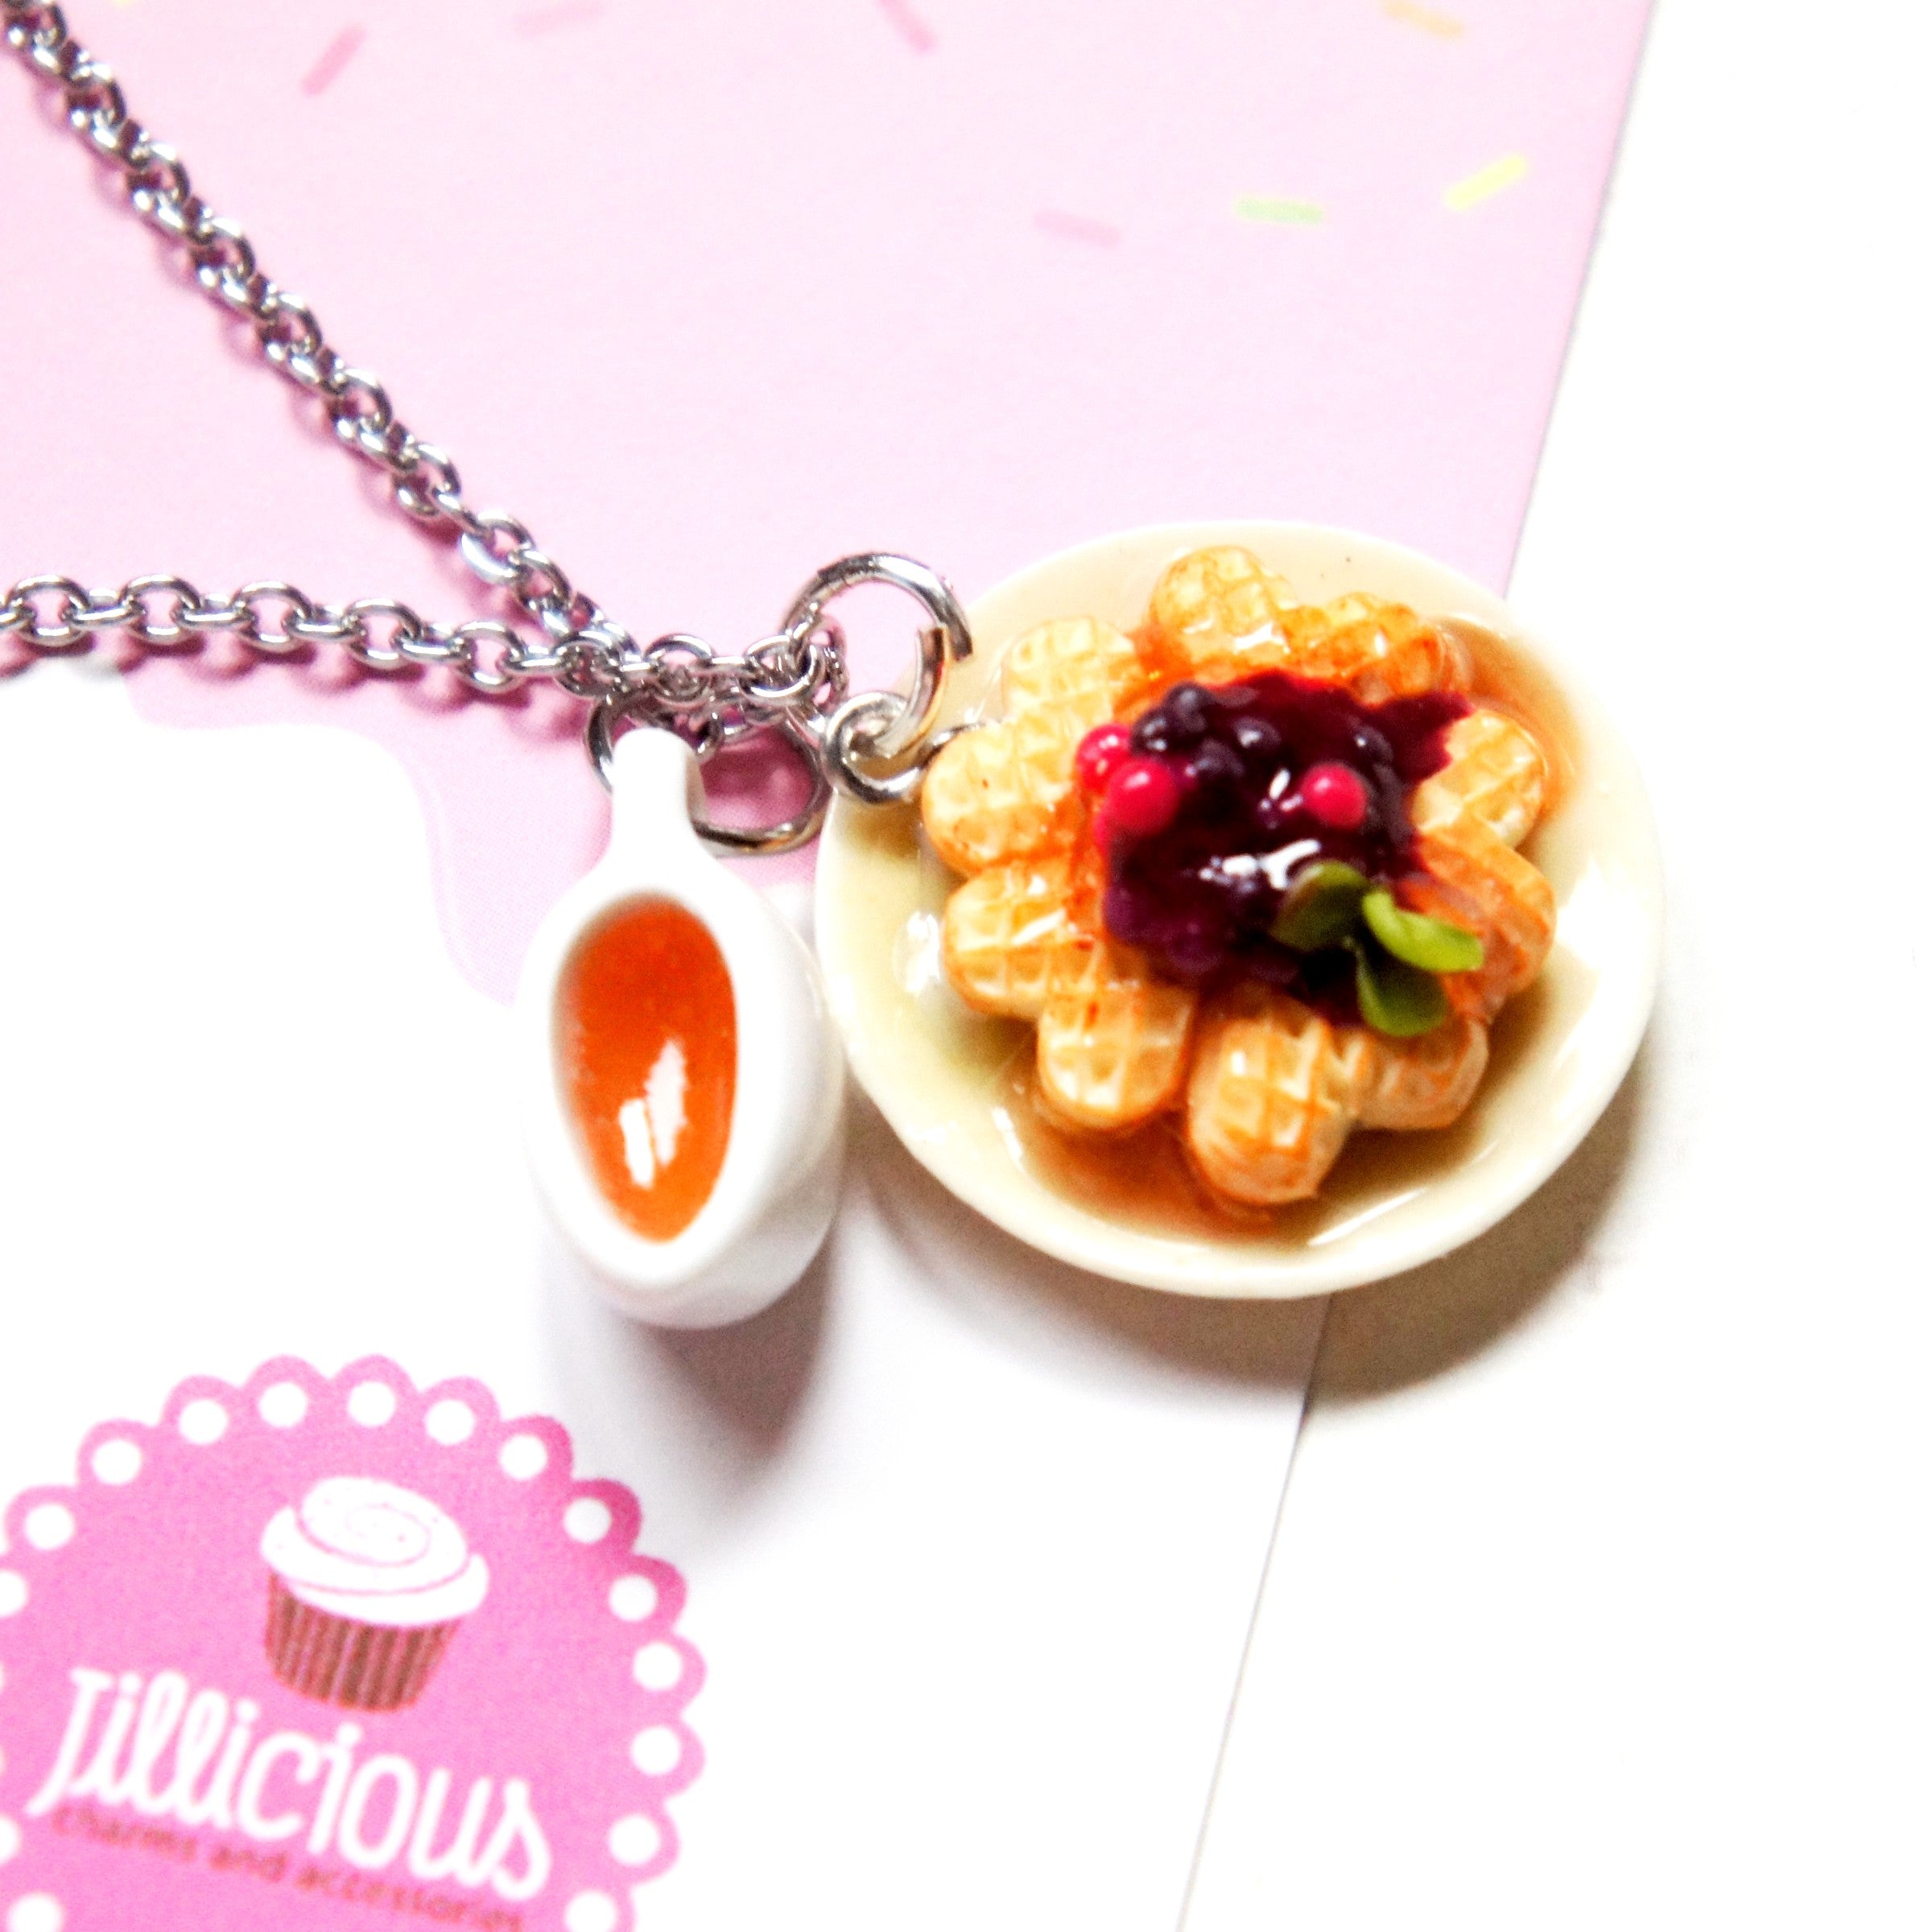 Waffle and Syrup Necklace